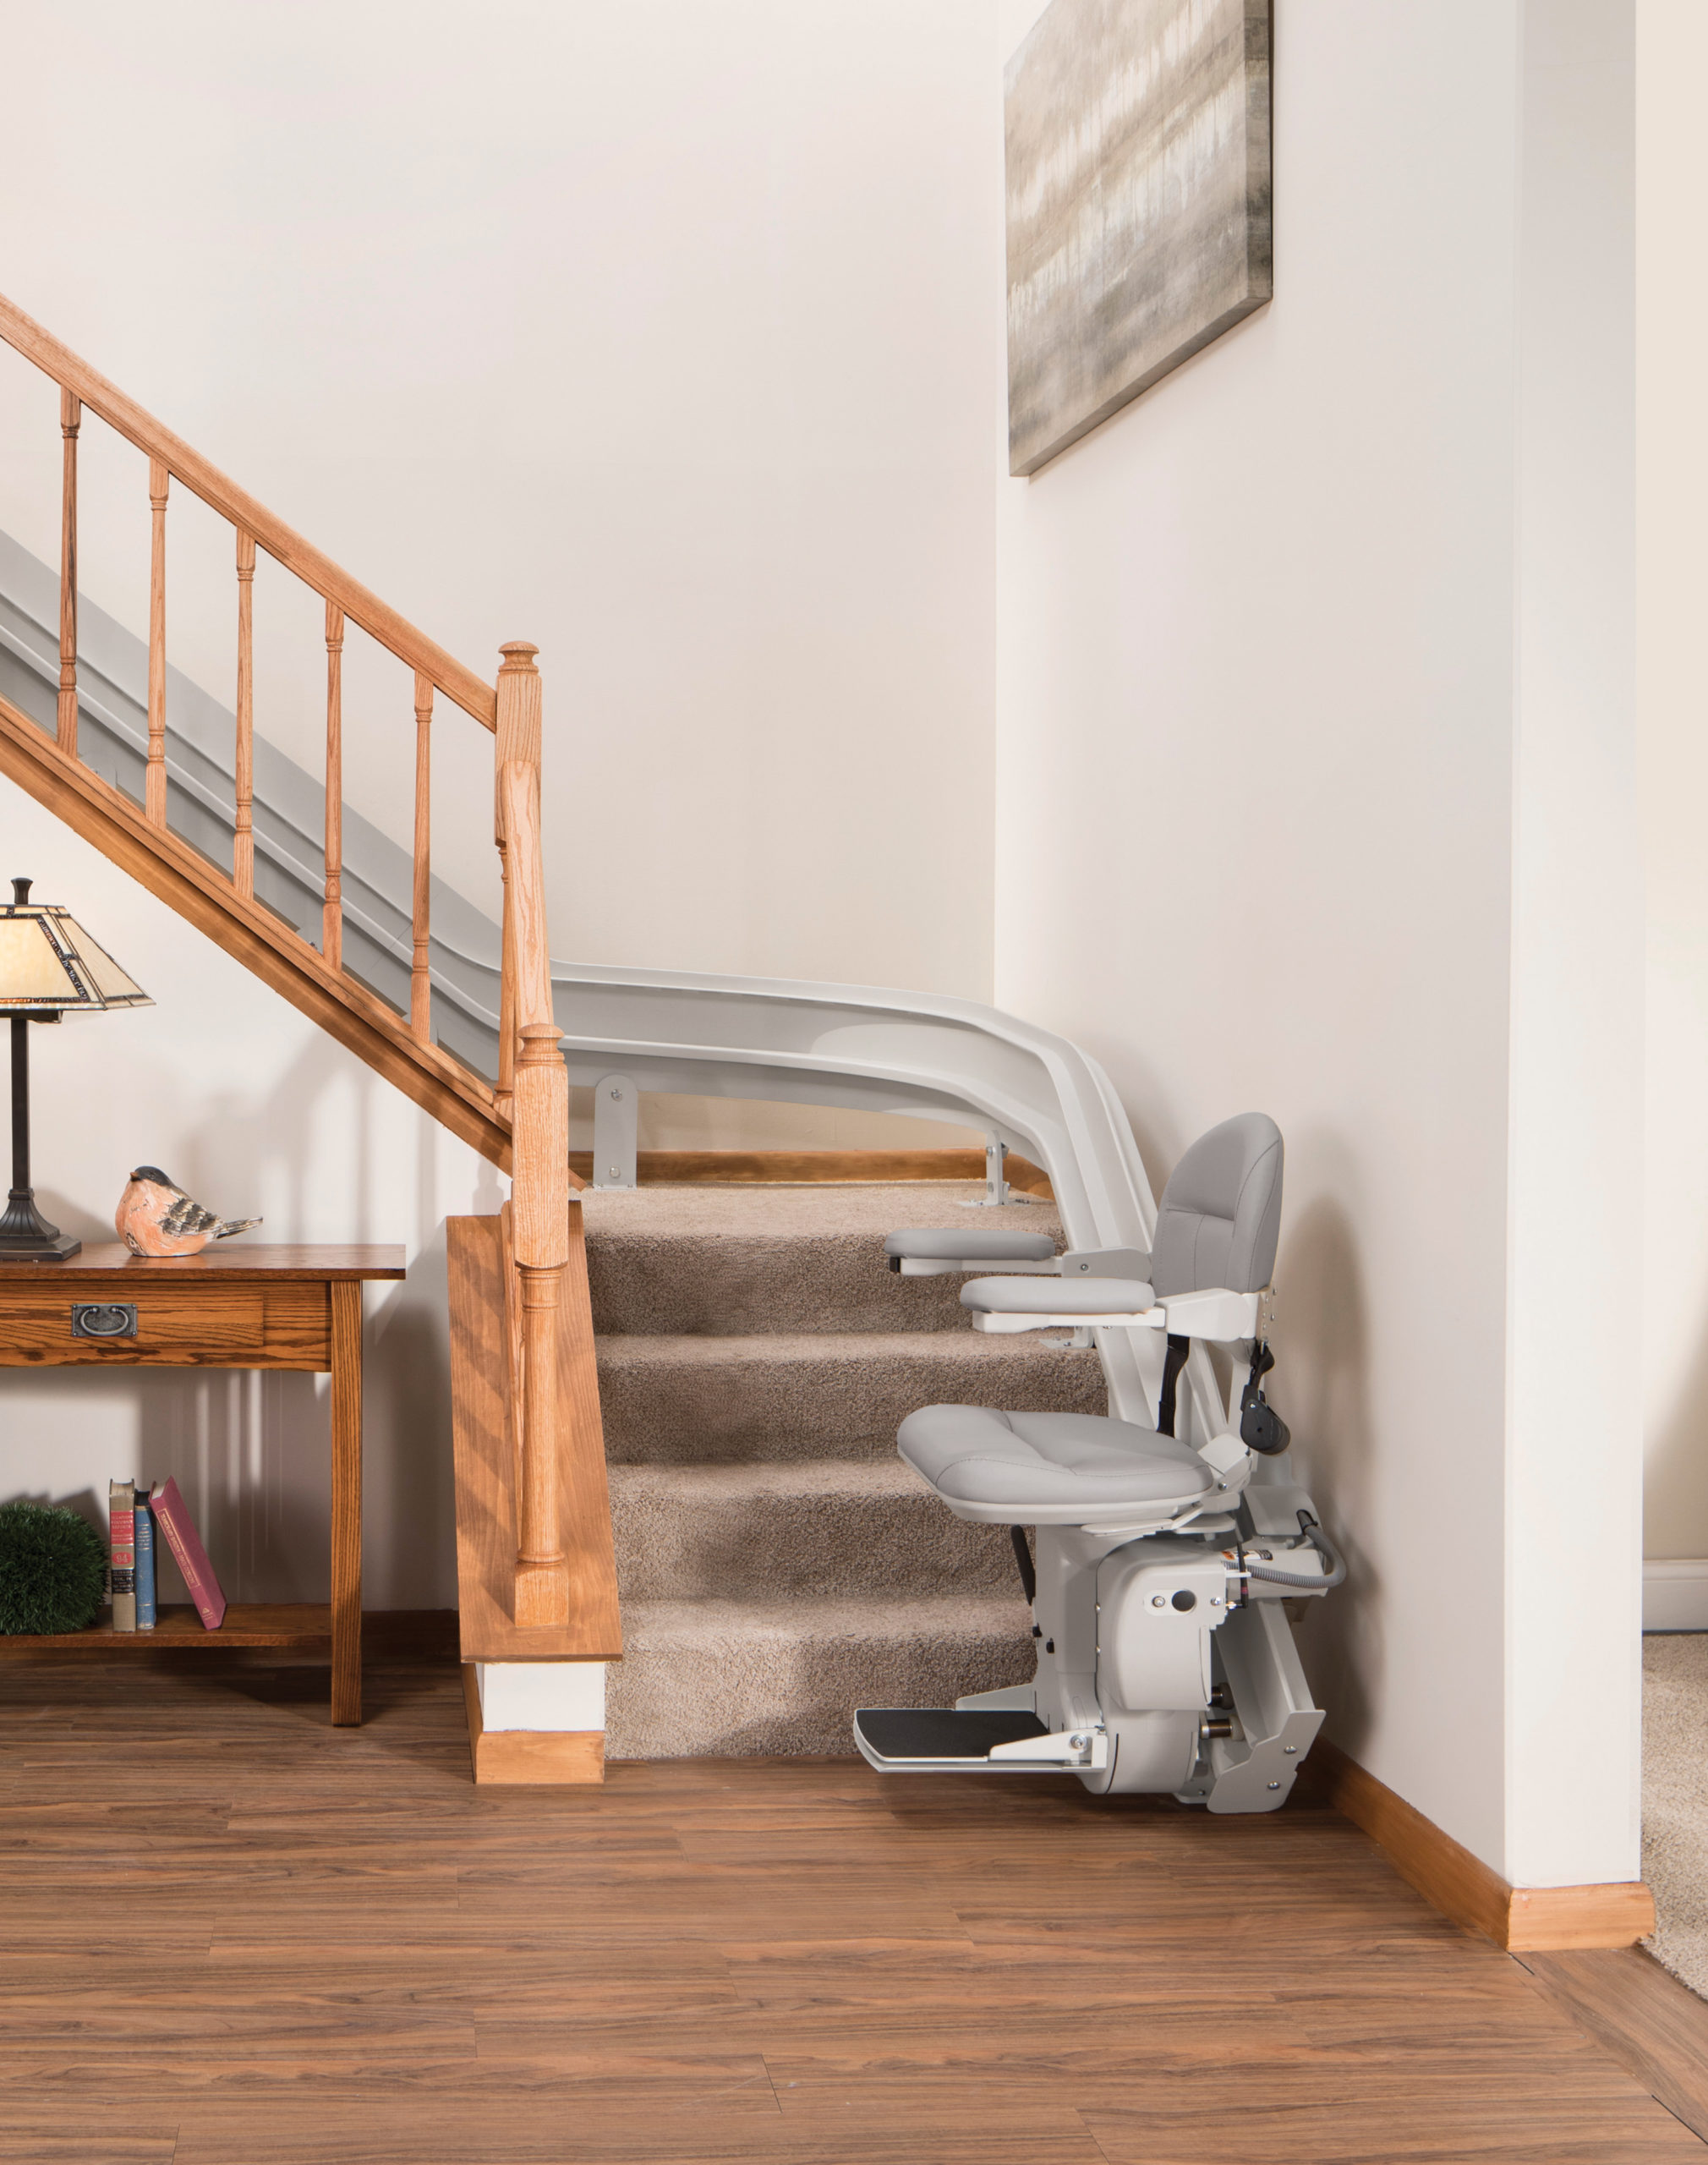 Home Medical Curved Stair Lifts | Mission Health + Home in Rochester, NY